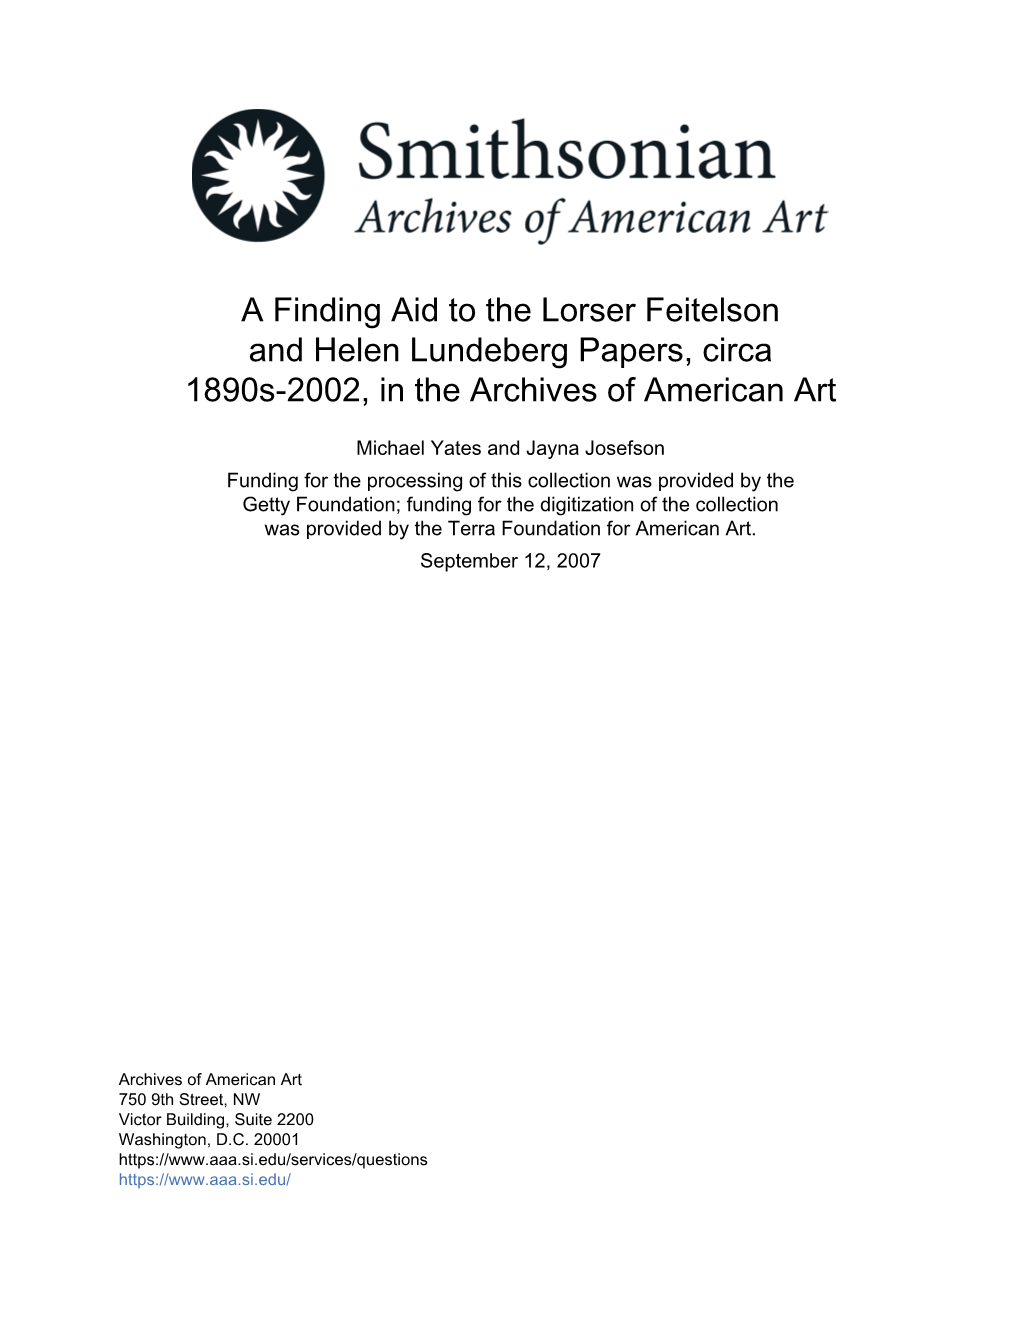 A Finding Aid to the Lorser Feitelson and Helen Lundeberg Papers, Circa 1890S-2002, in the Archives of American Art